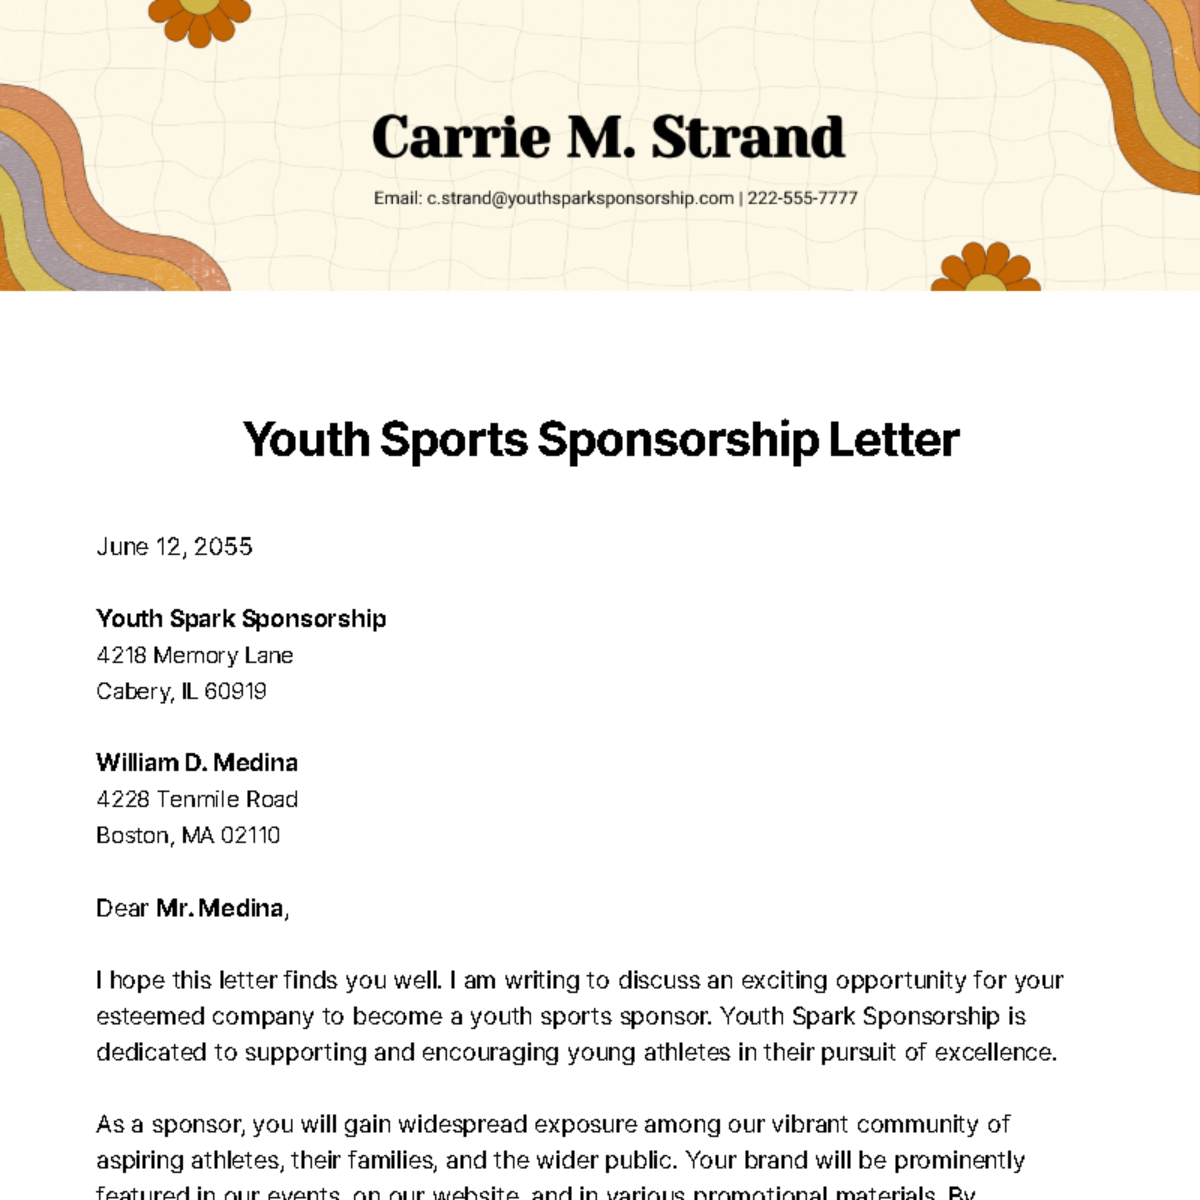 Youth Sports Sponsorship Letter   Template